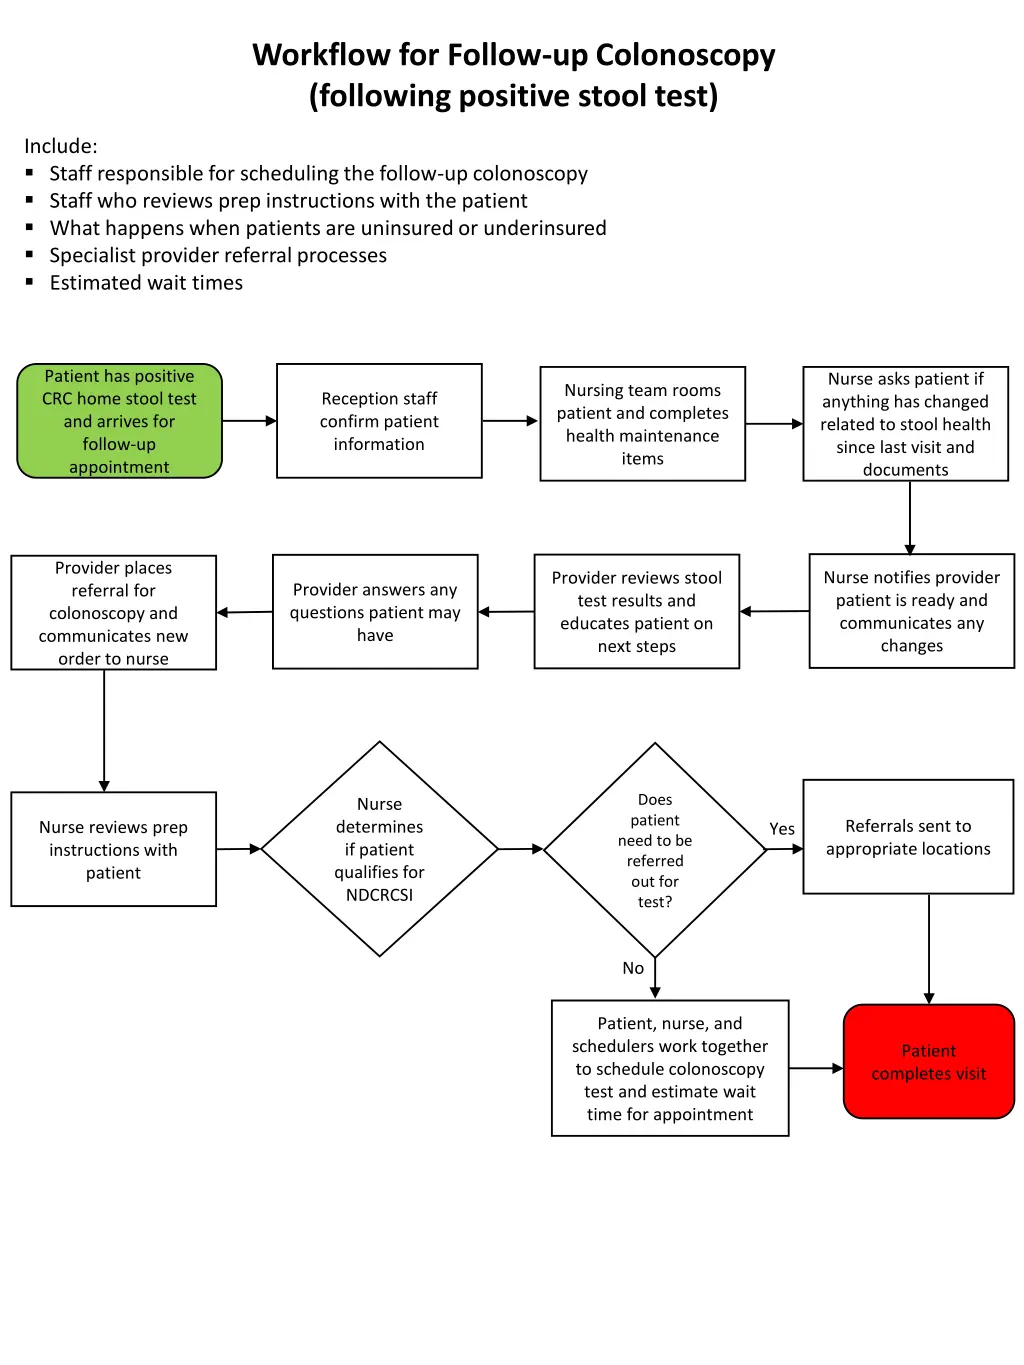 workflow for follow up colonoscopy following